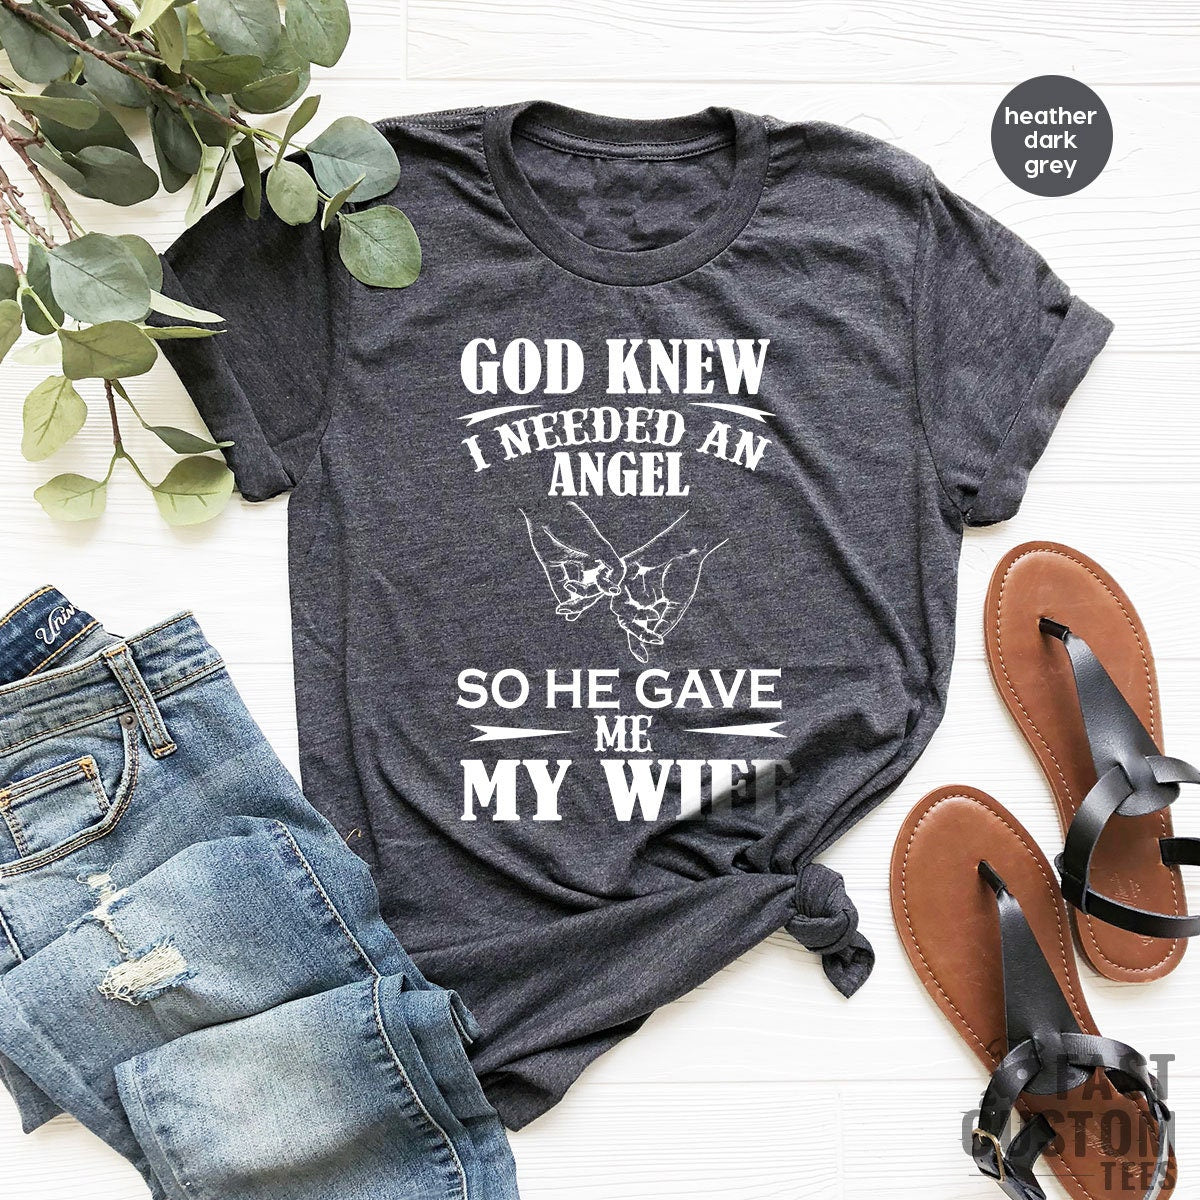 Anniversary Gift, Newlywed Gift, Wedding Gift, Shirt for Wife, Just Married Shirt